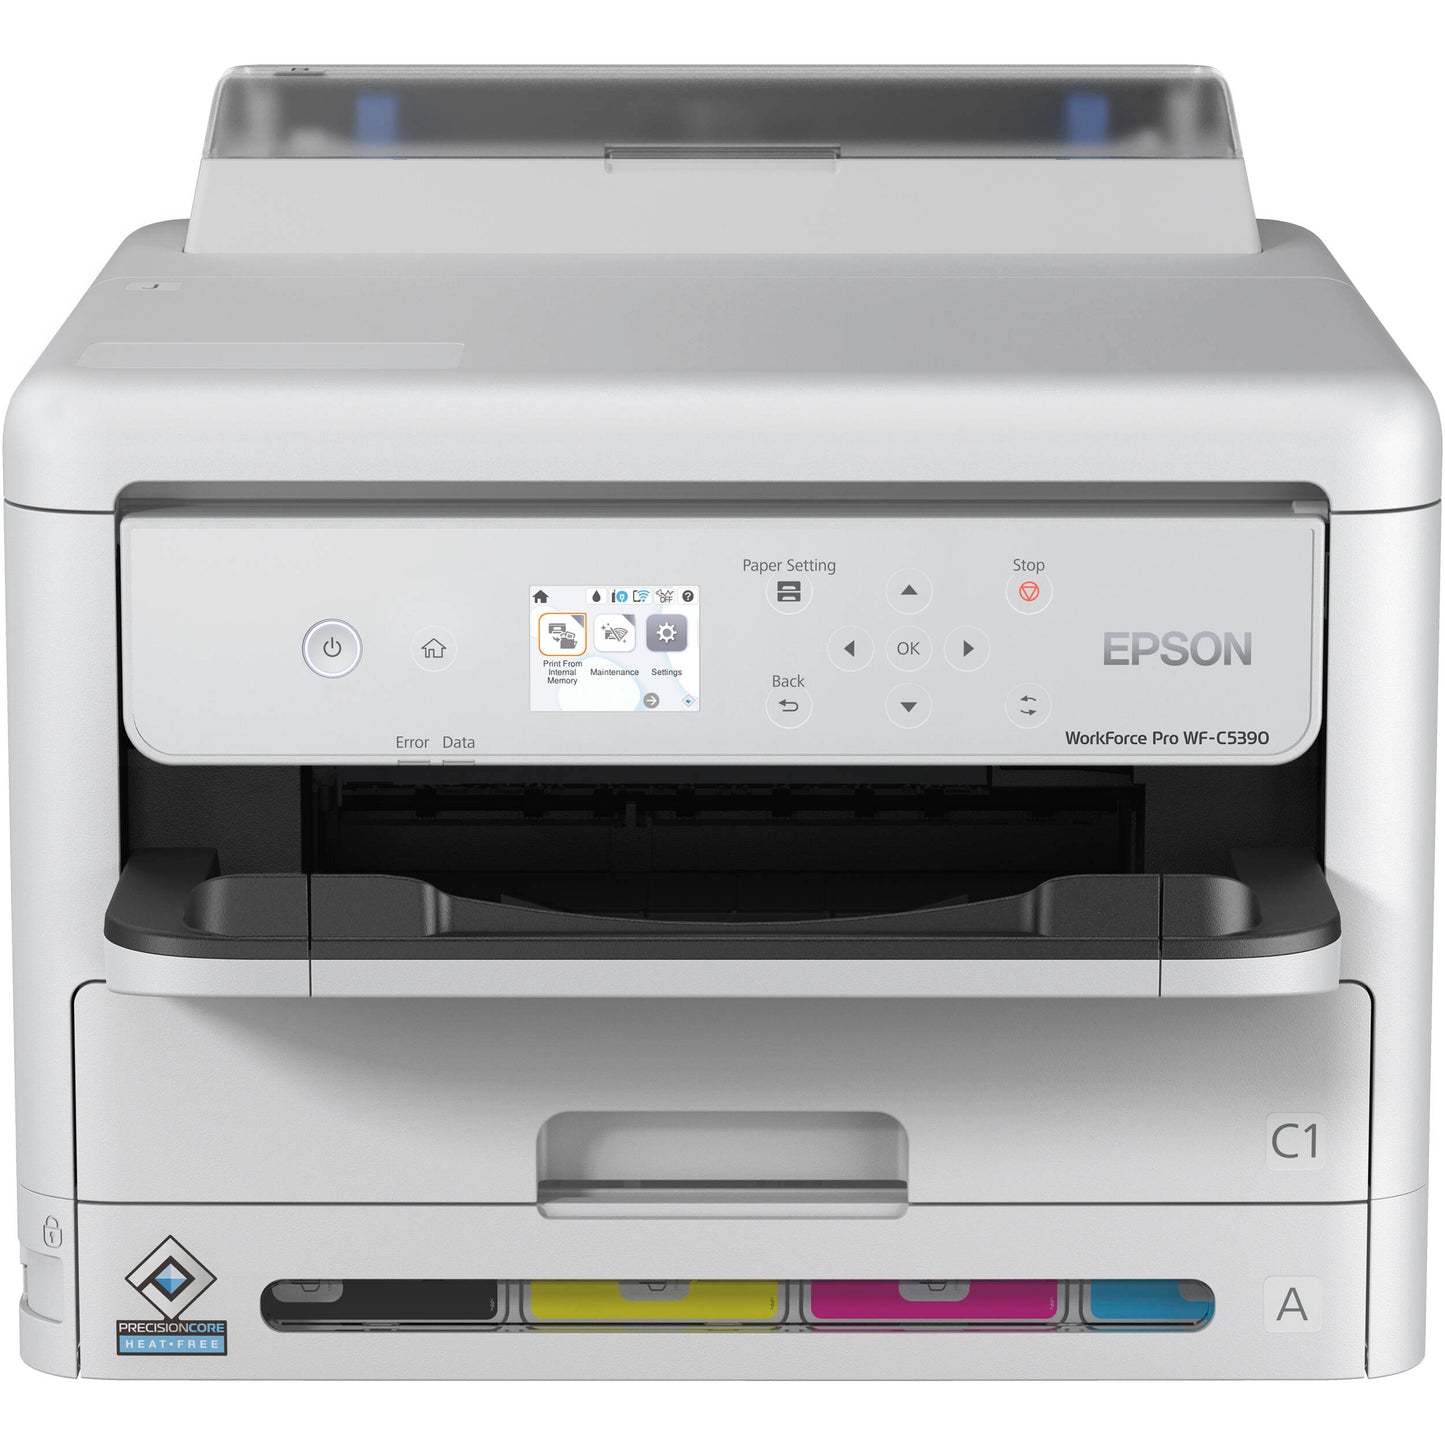 Epson WorkForce Pro WF-C5390 A4 Colored Auto Duplex Inkjet Printer with Ethernet & Wi-Fi / Wi-Fi Direct, USB 2.0 Connectivity, 4-Colored Hassle-Free, Ultra Low Cost Efficient, High-Yield Ink, Epson Connect for Home and Commercial Use